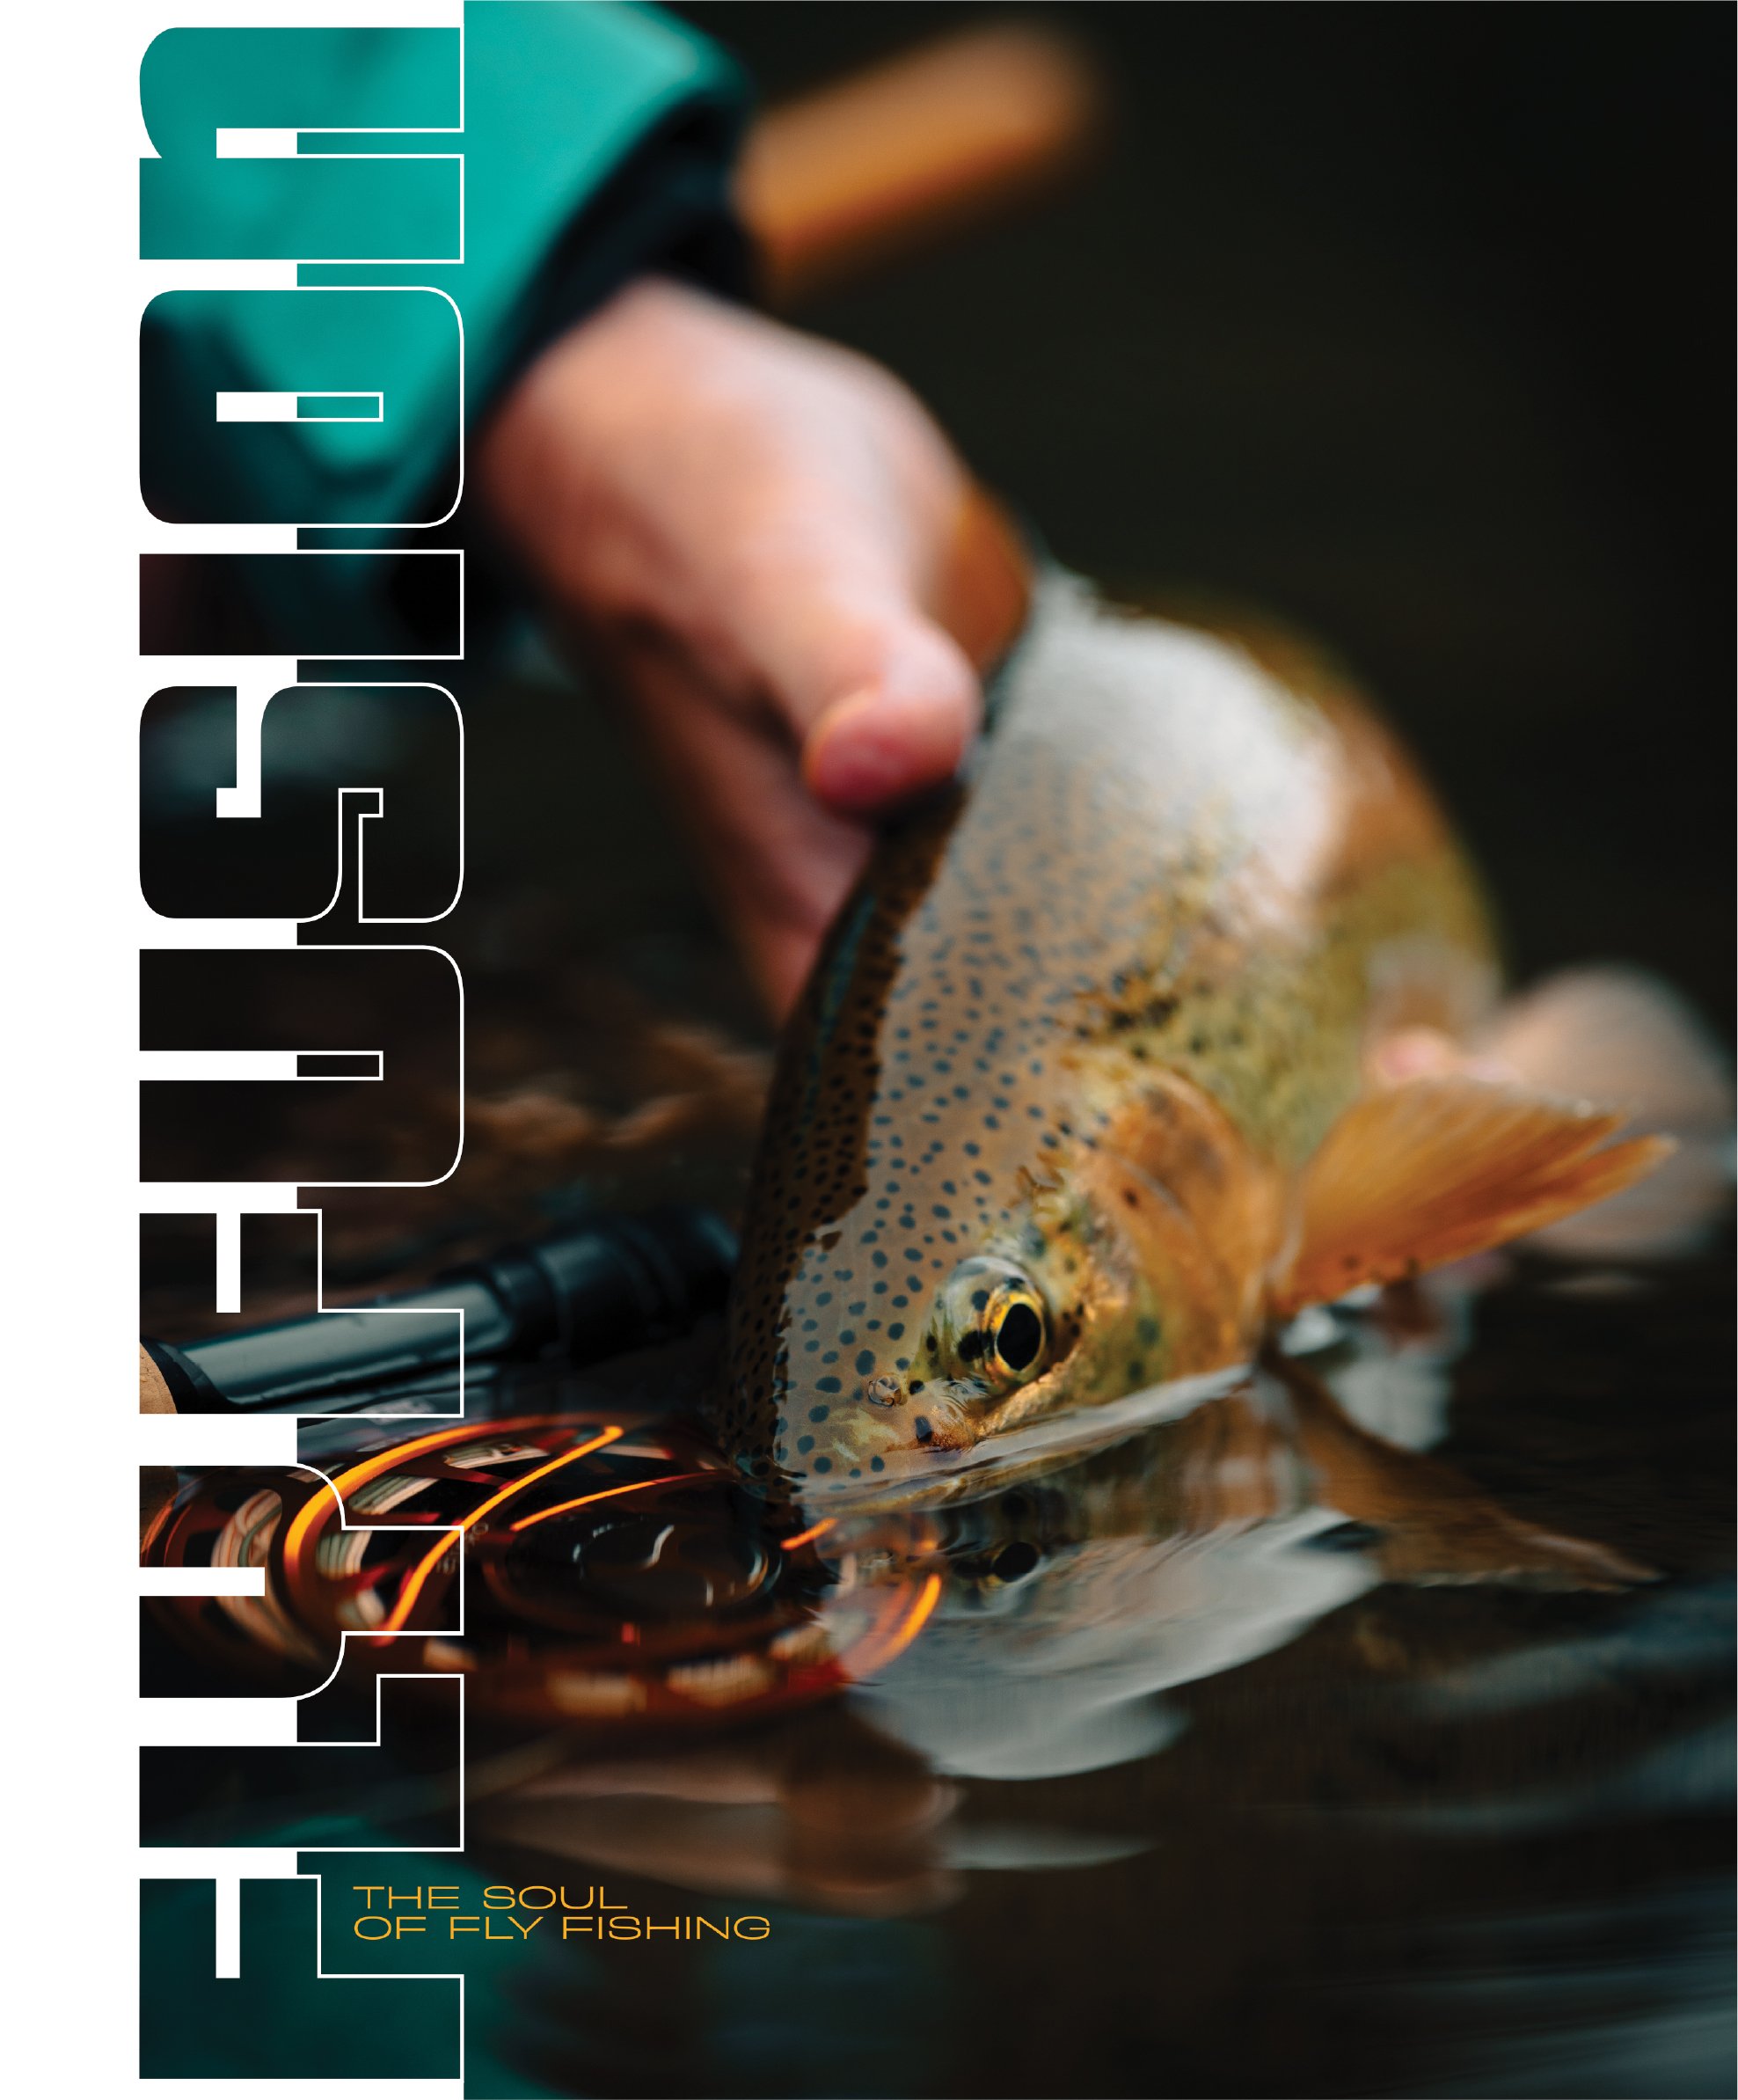 The Ultimate Magazine for Fly Fishing